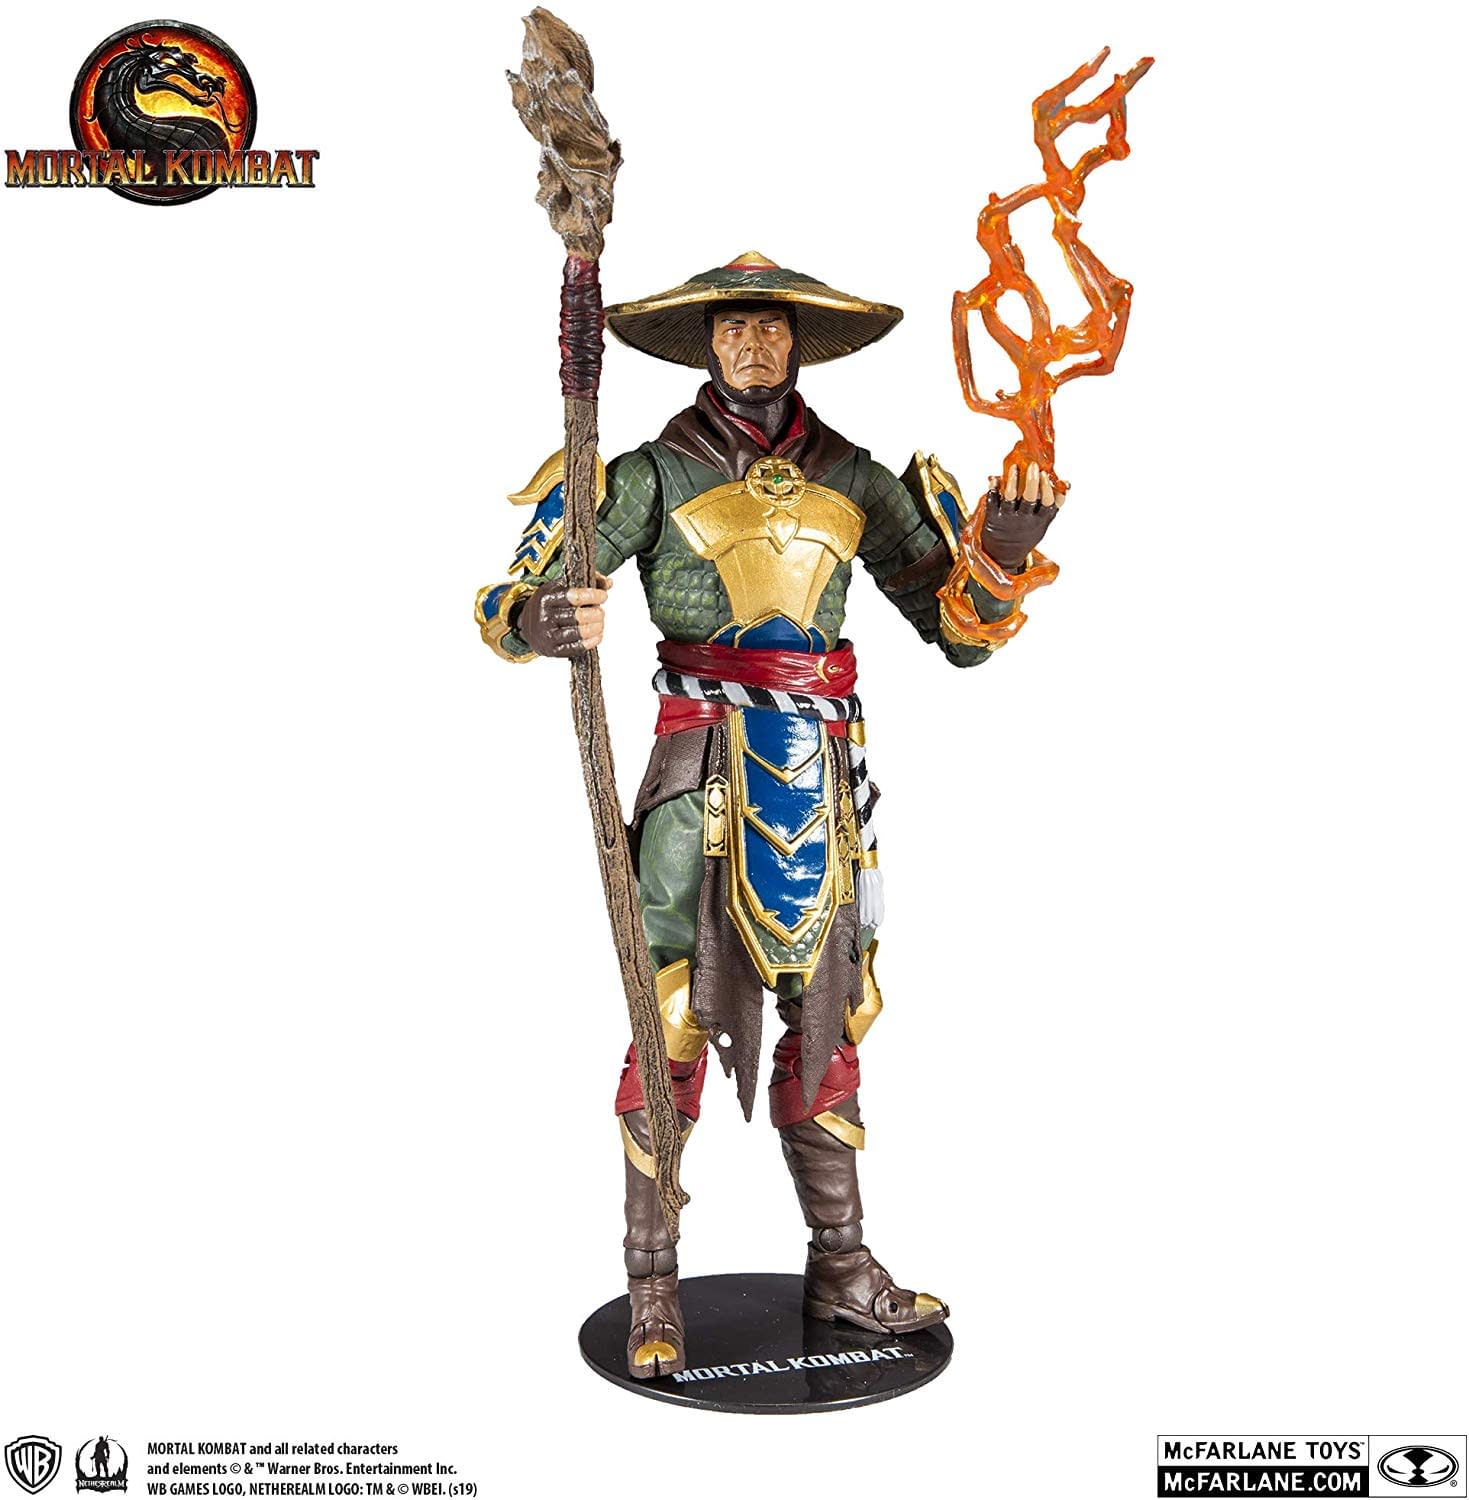 Mortal Kombat XI Gets Two New Figures from McFarlane Toys